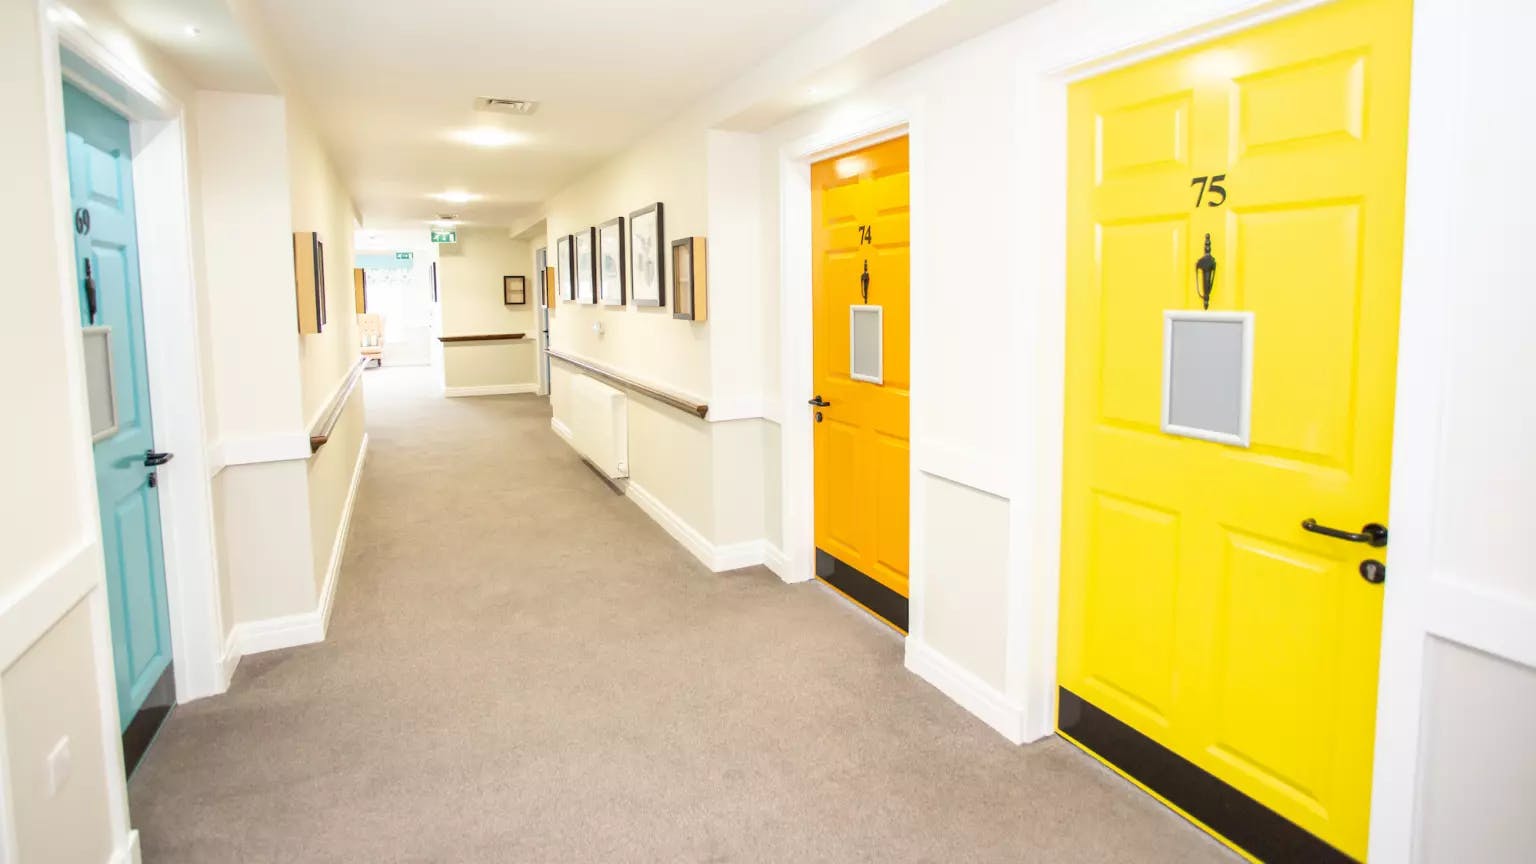 Hallway of Dukeminster Court care home in Dunstable, Bedfordshire